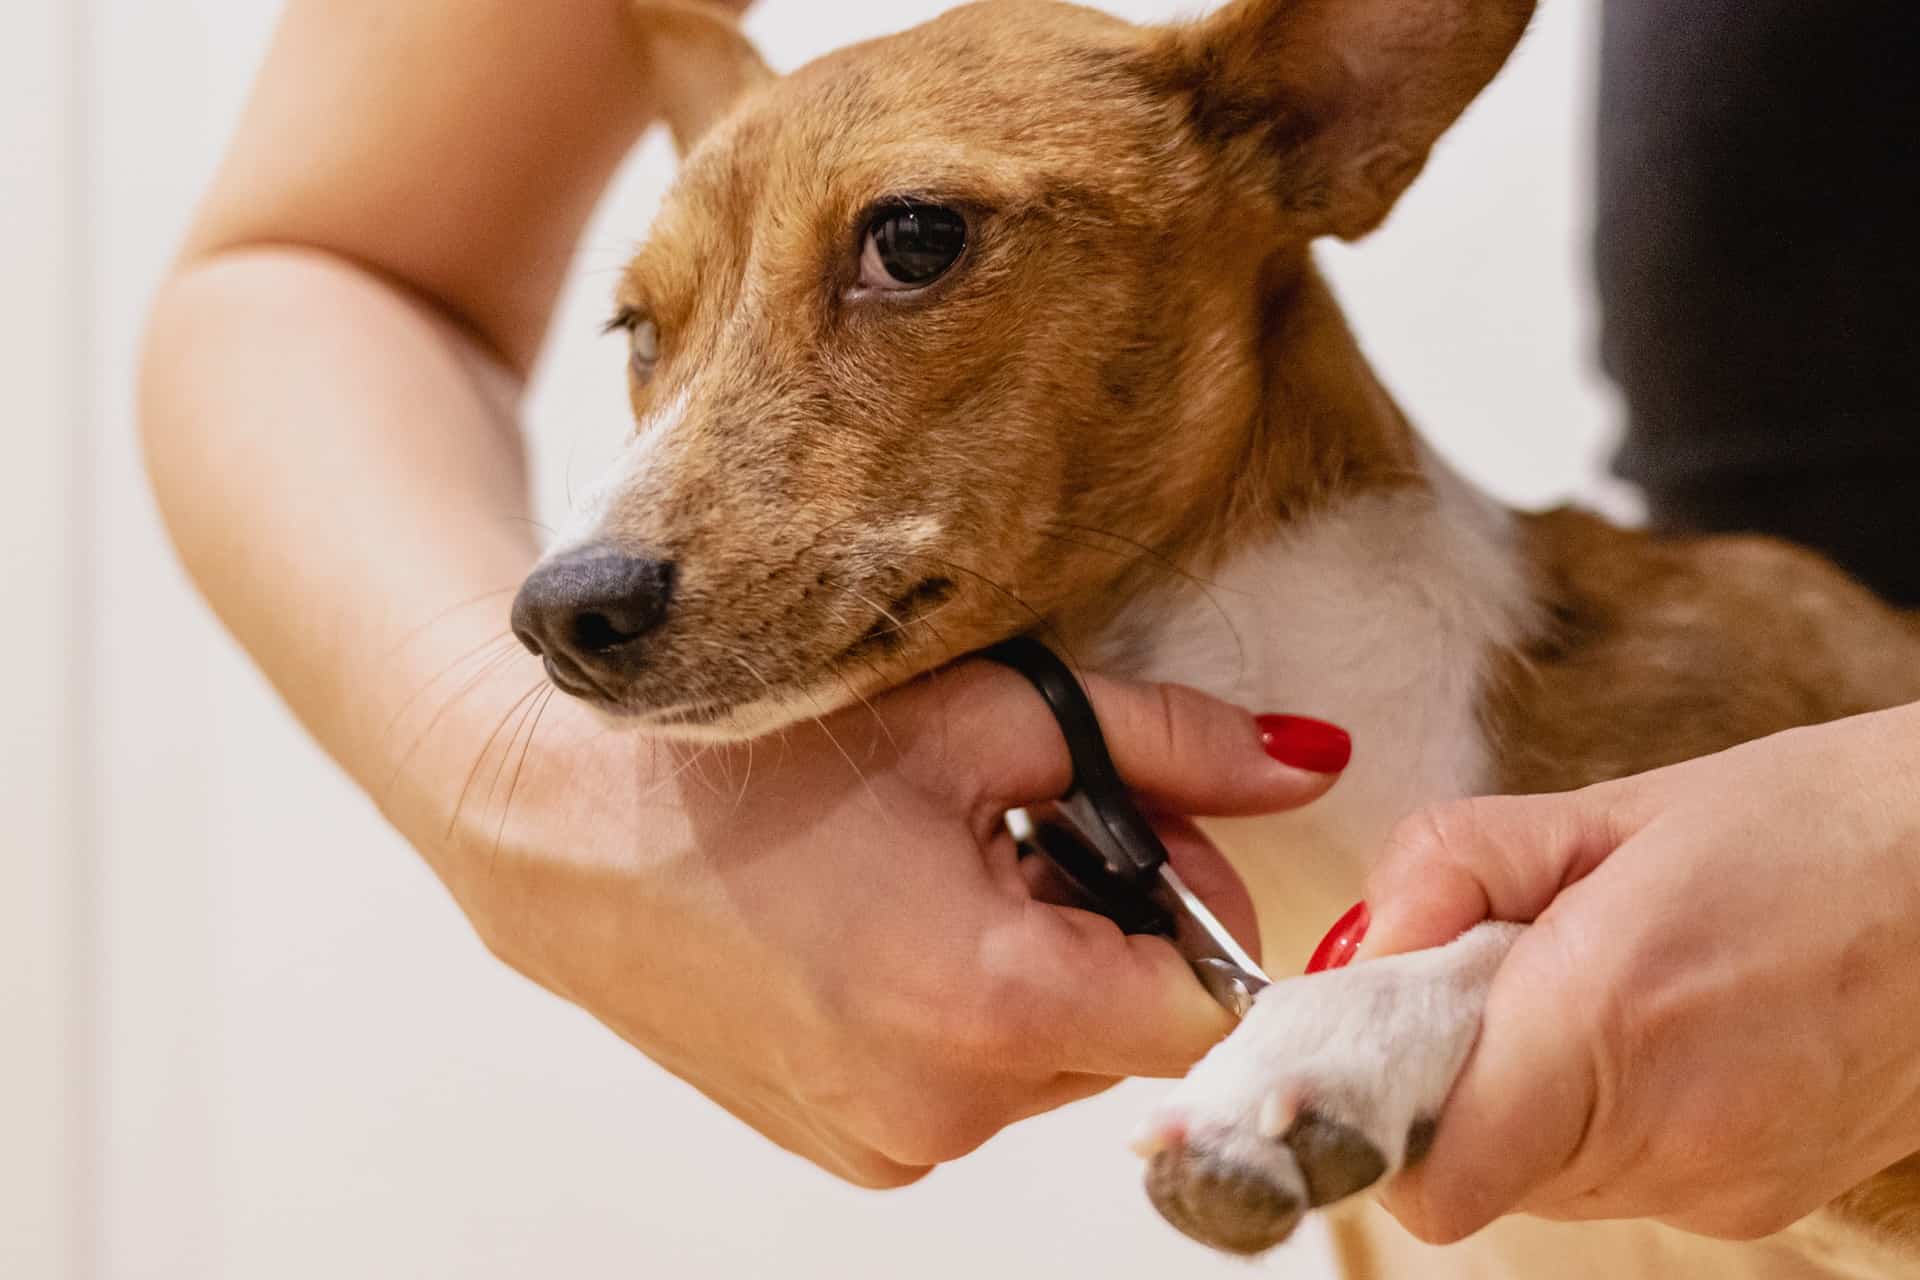 Trimming your pet's nails